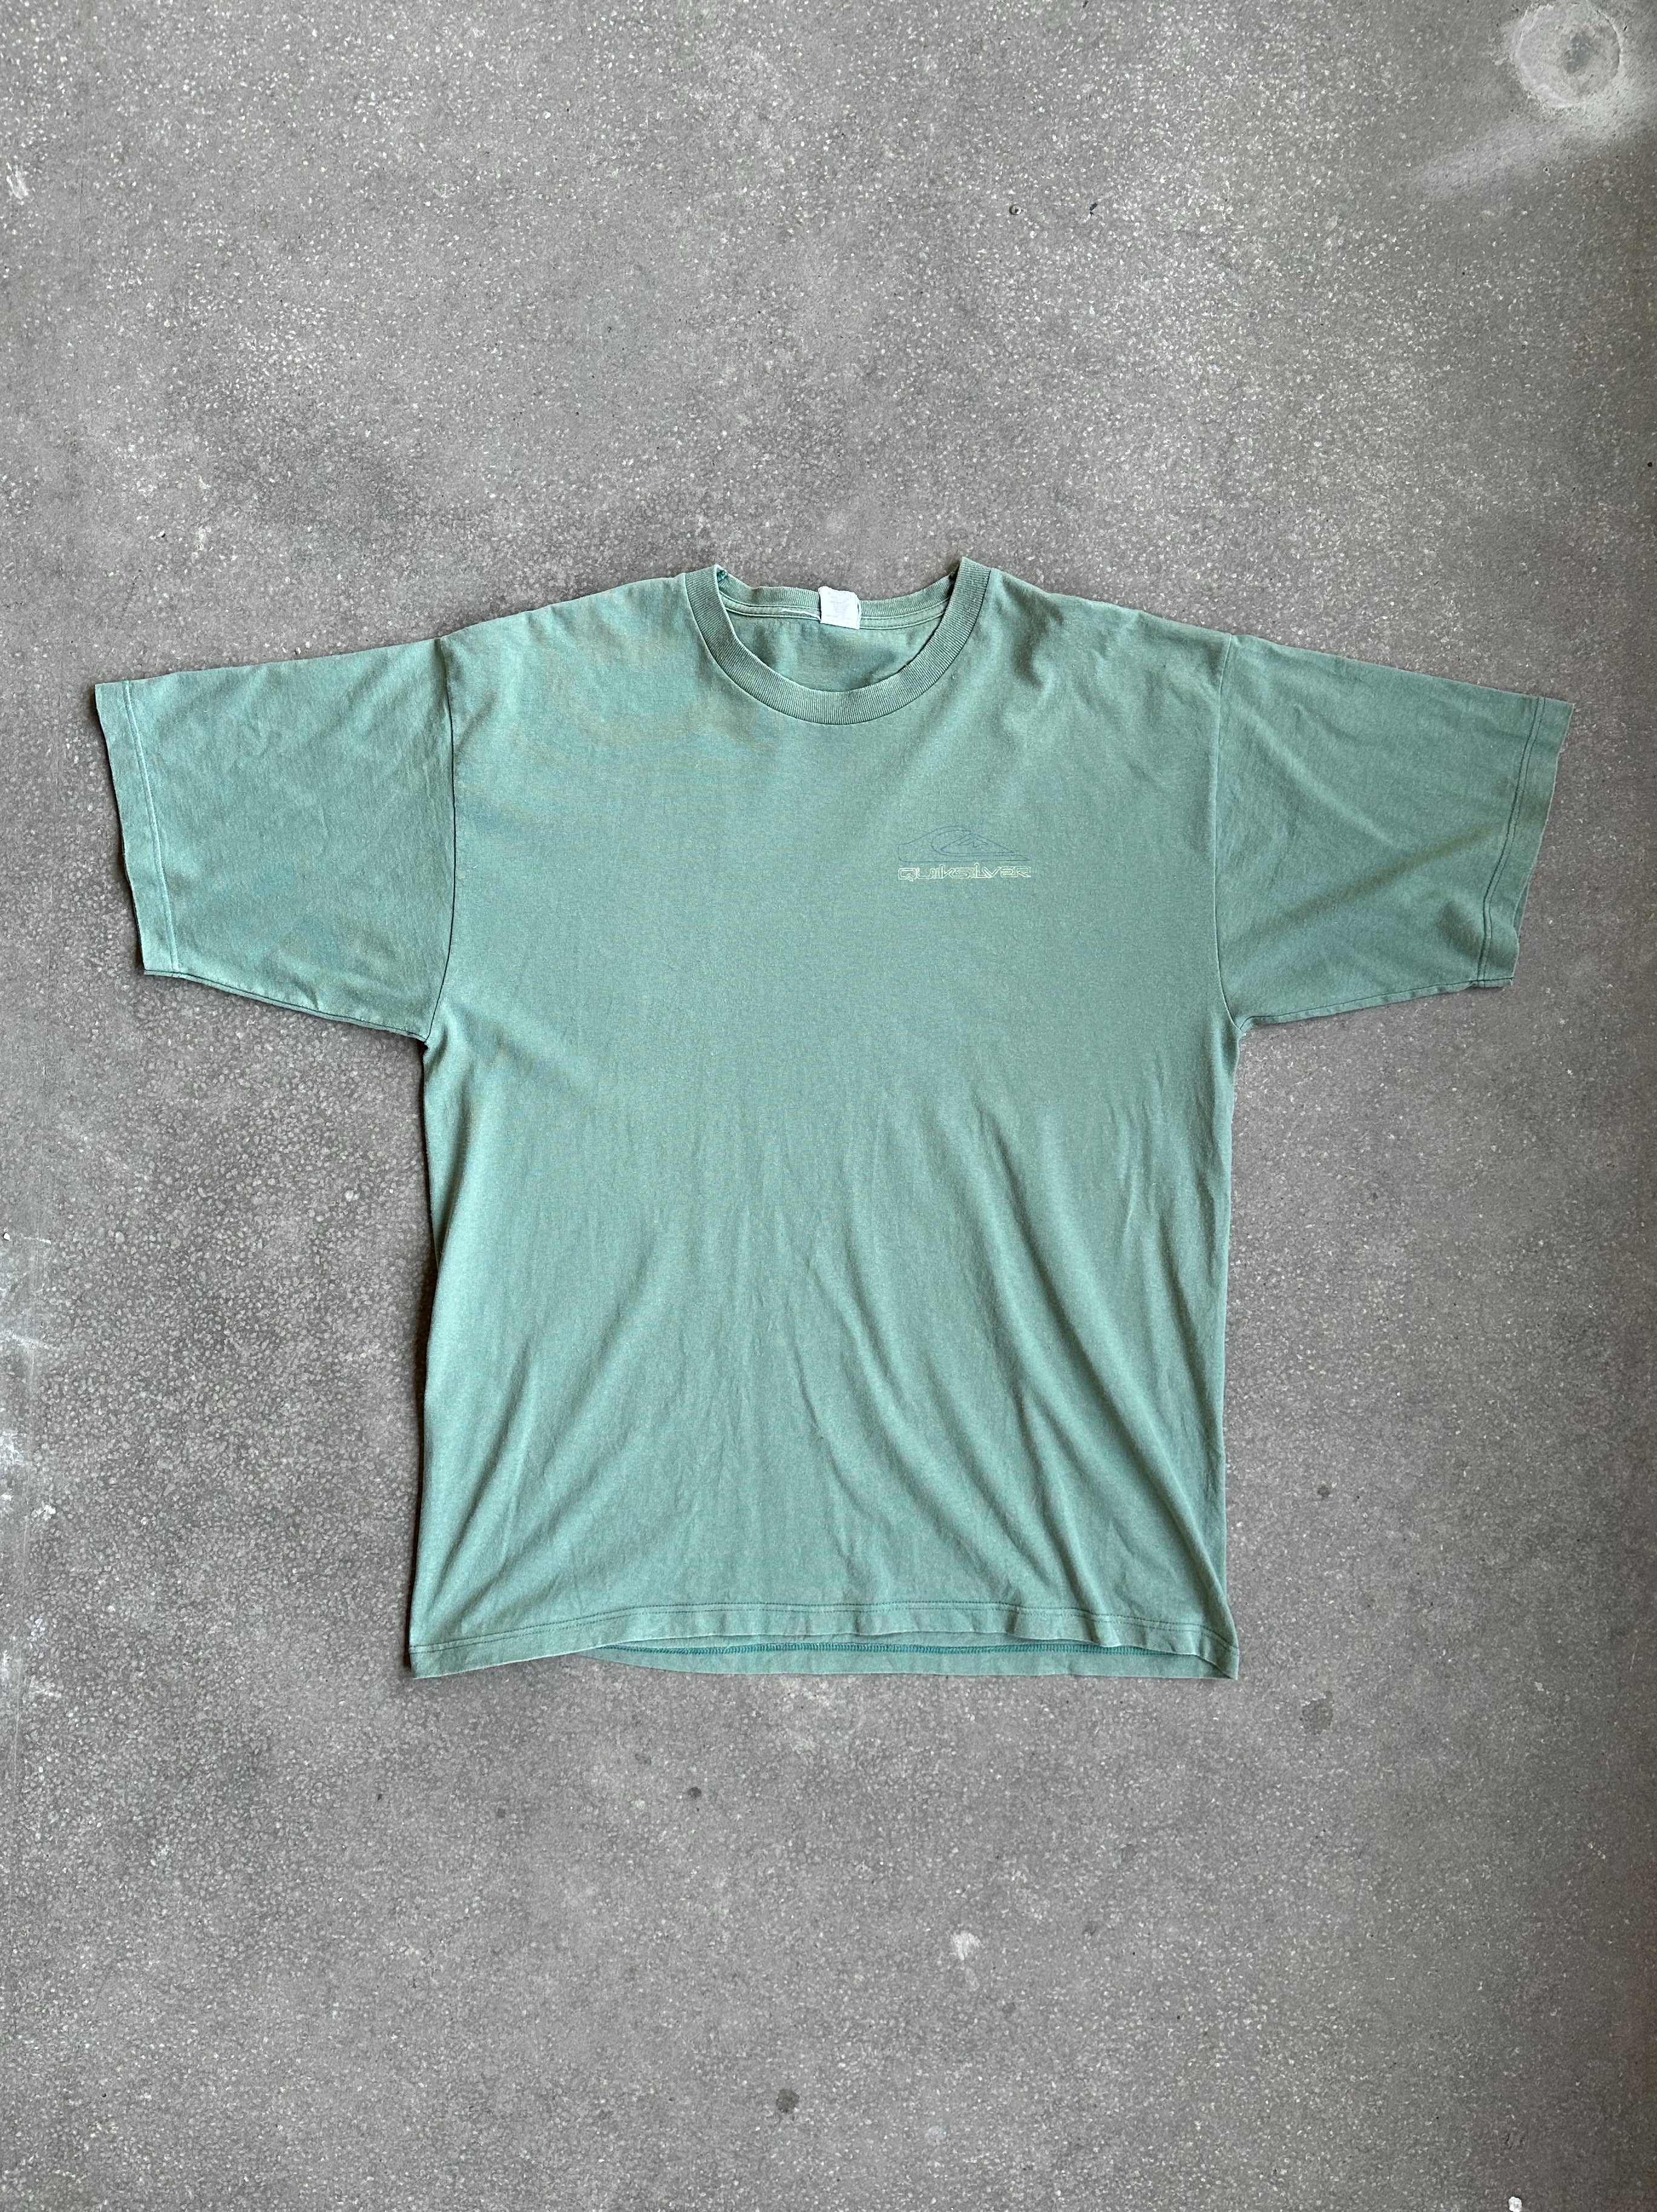 Vintage Quiksilver Tee - Extra Large